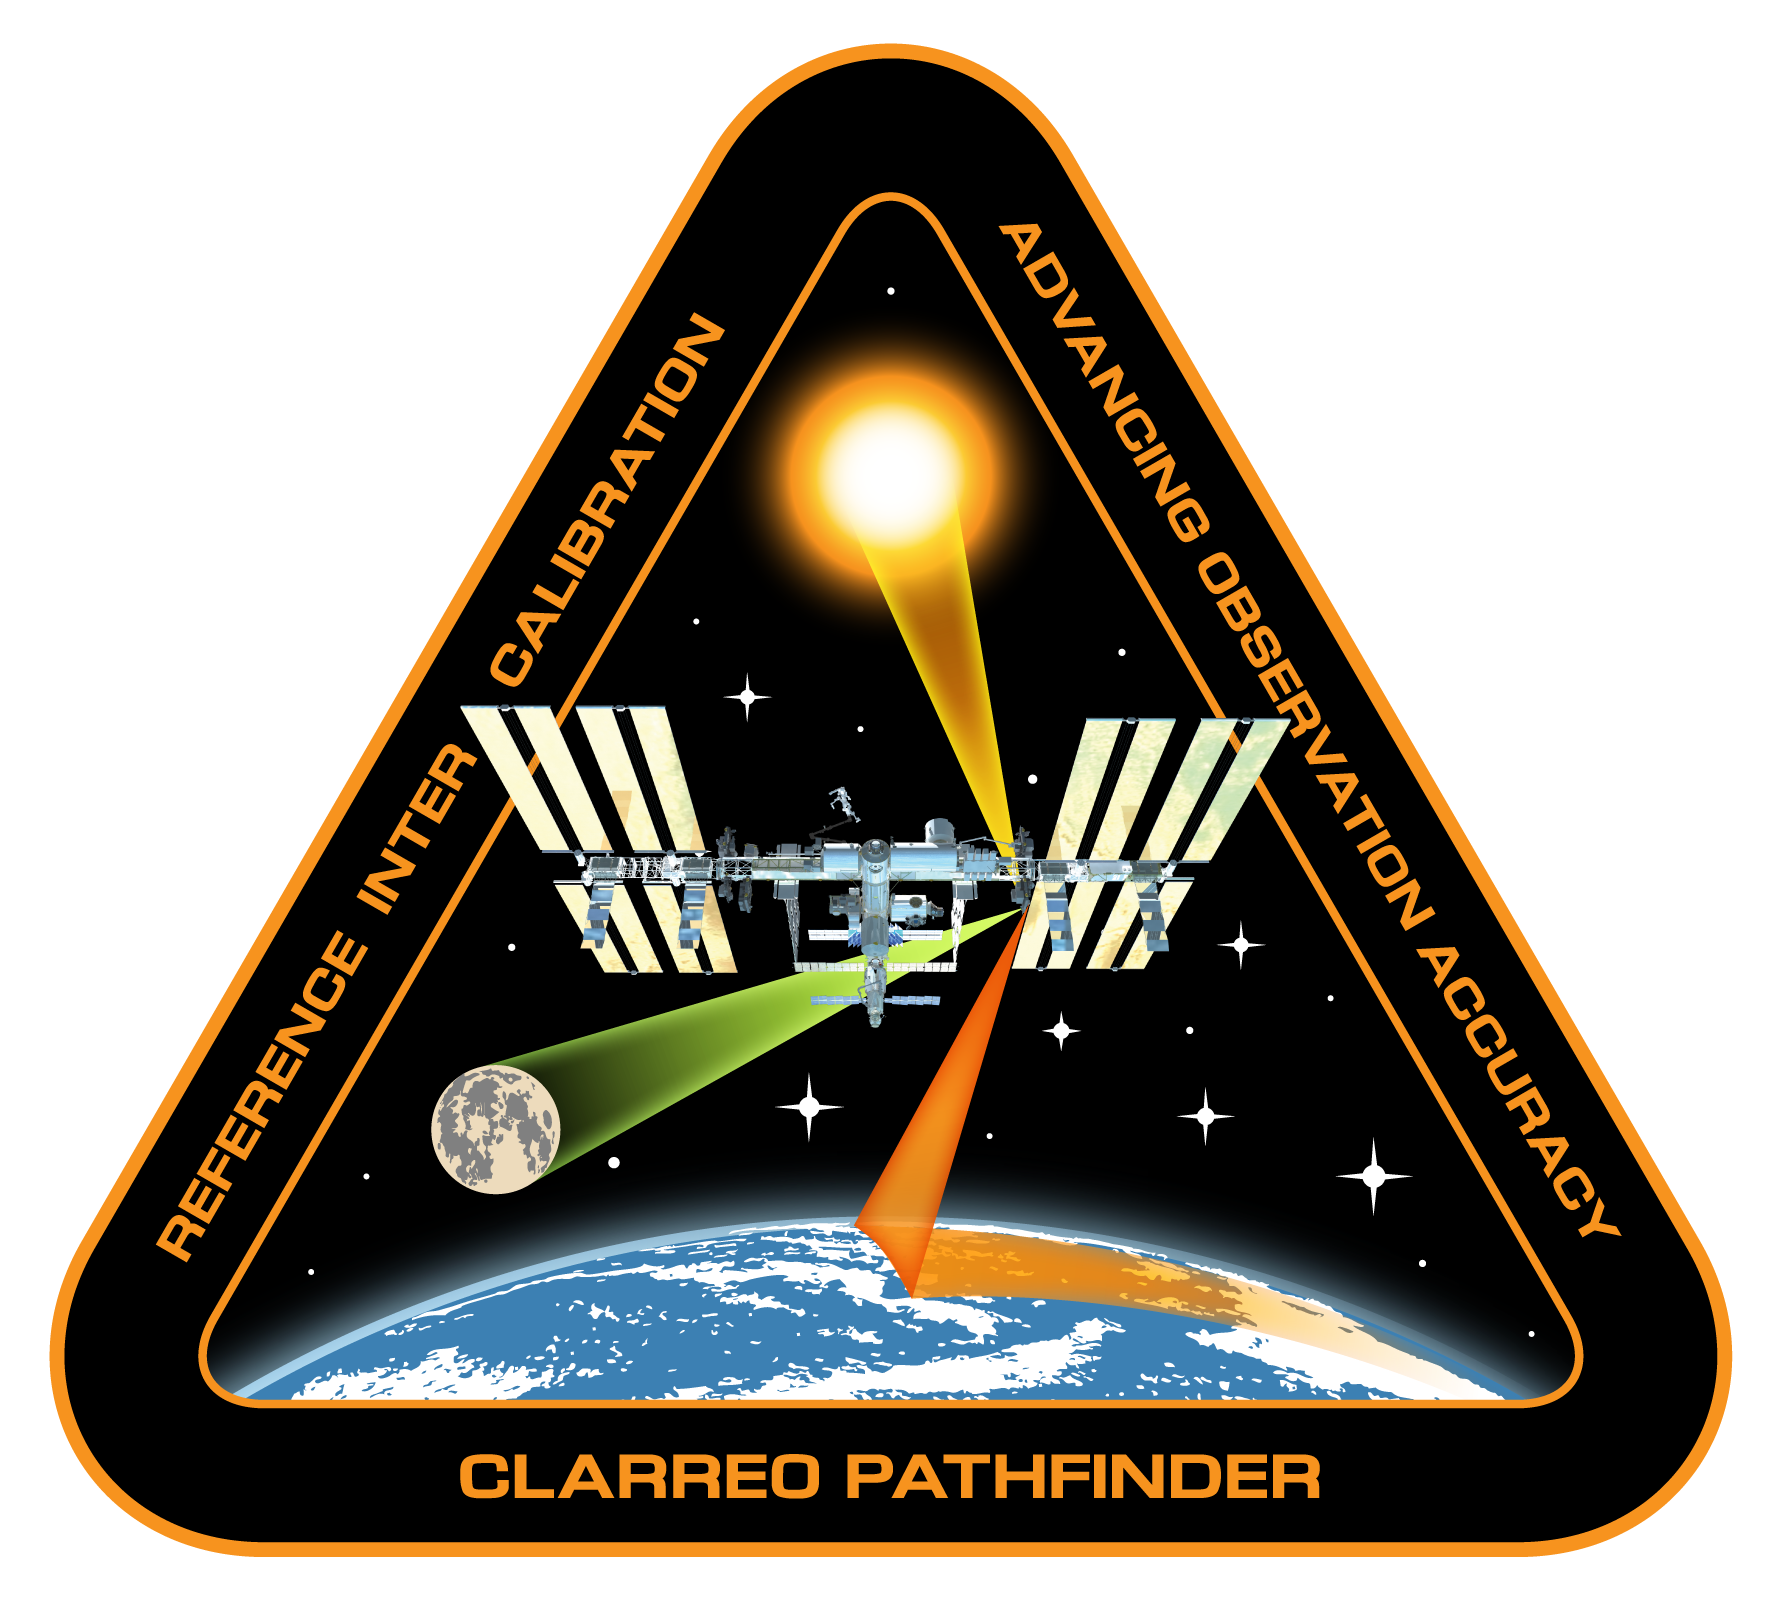 CLARREO Pathfinder mission patch showing the instrument on the ISS.